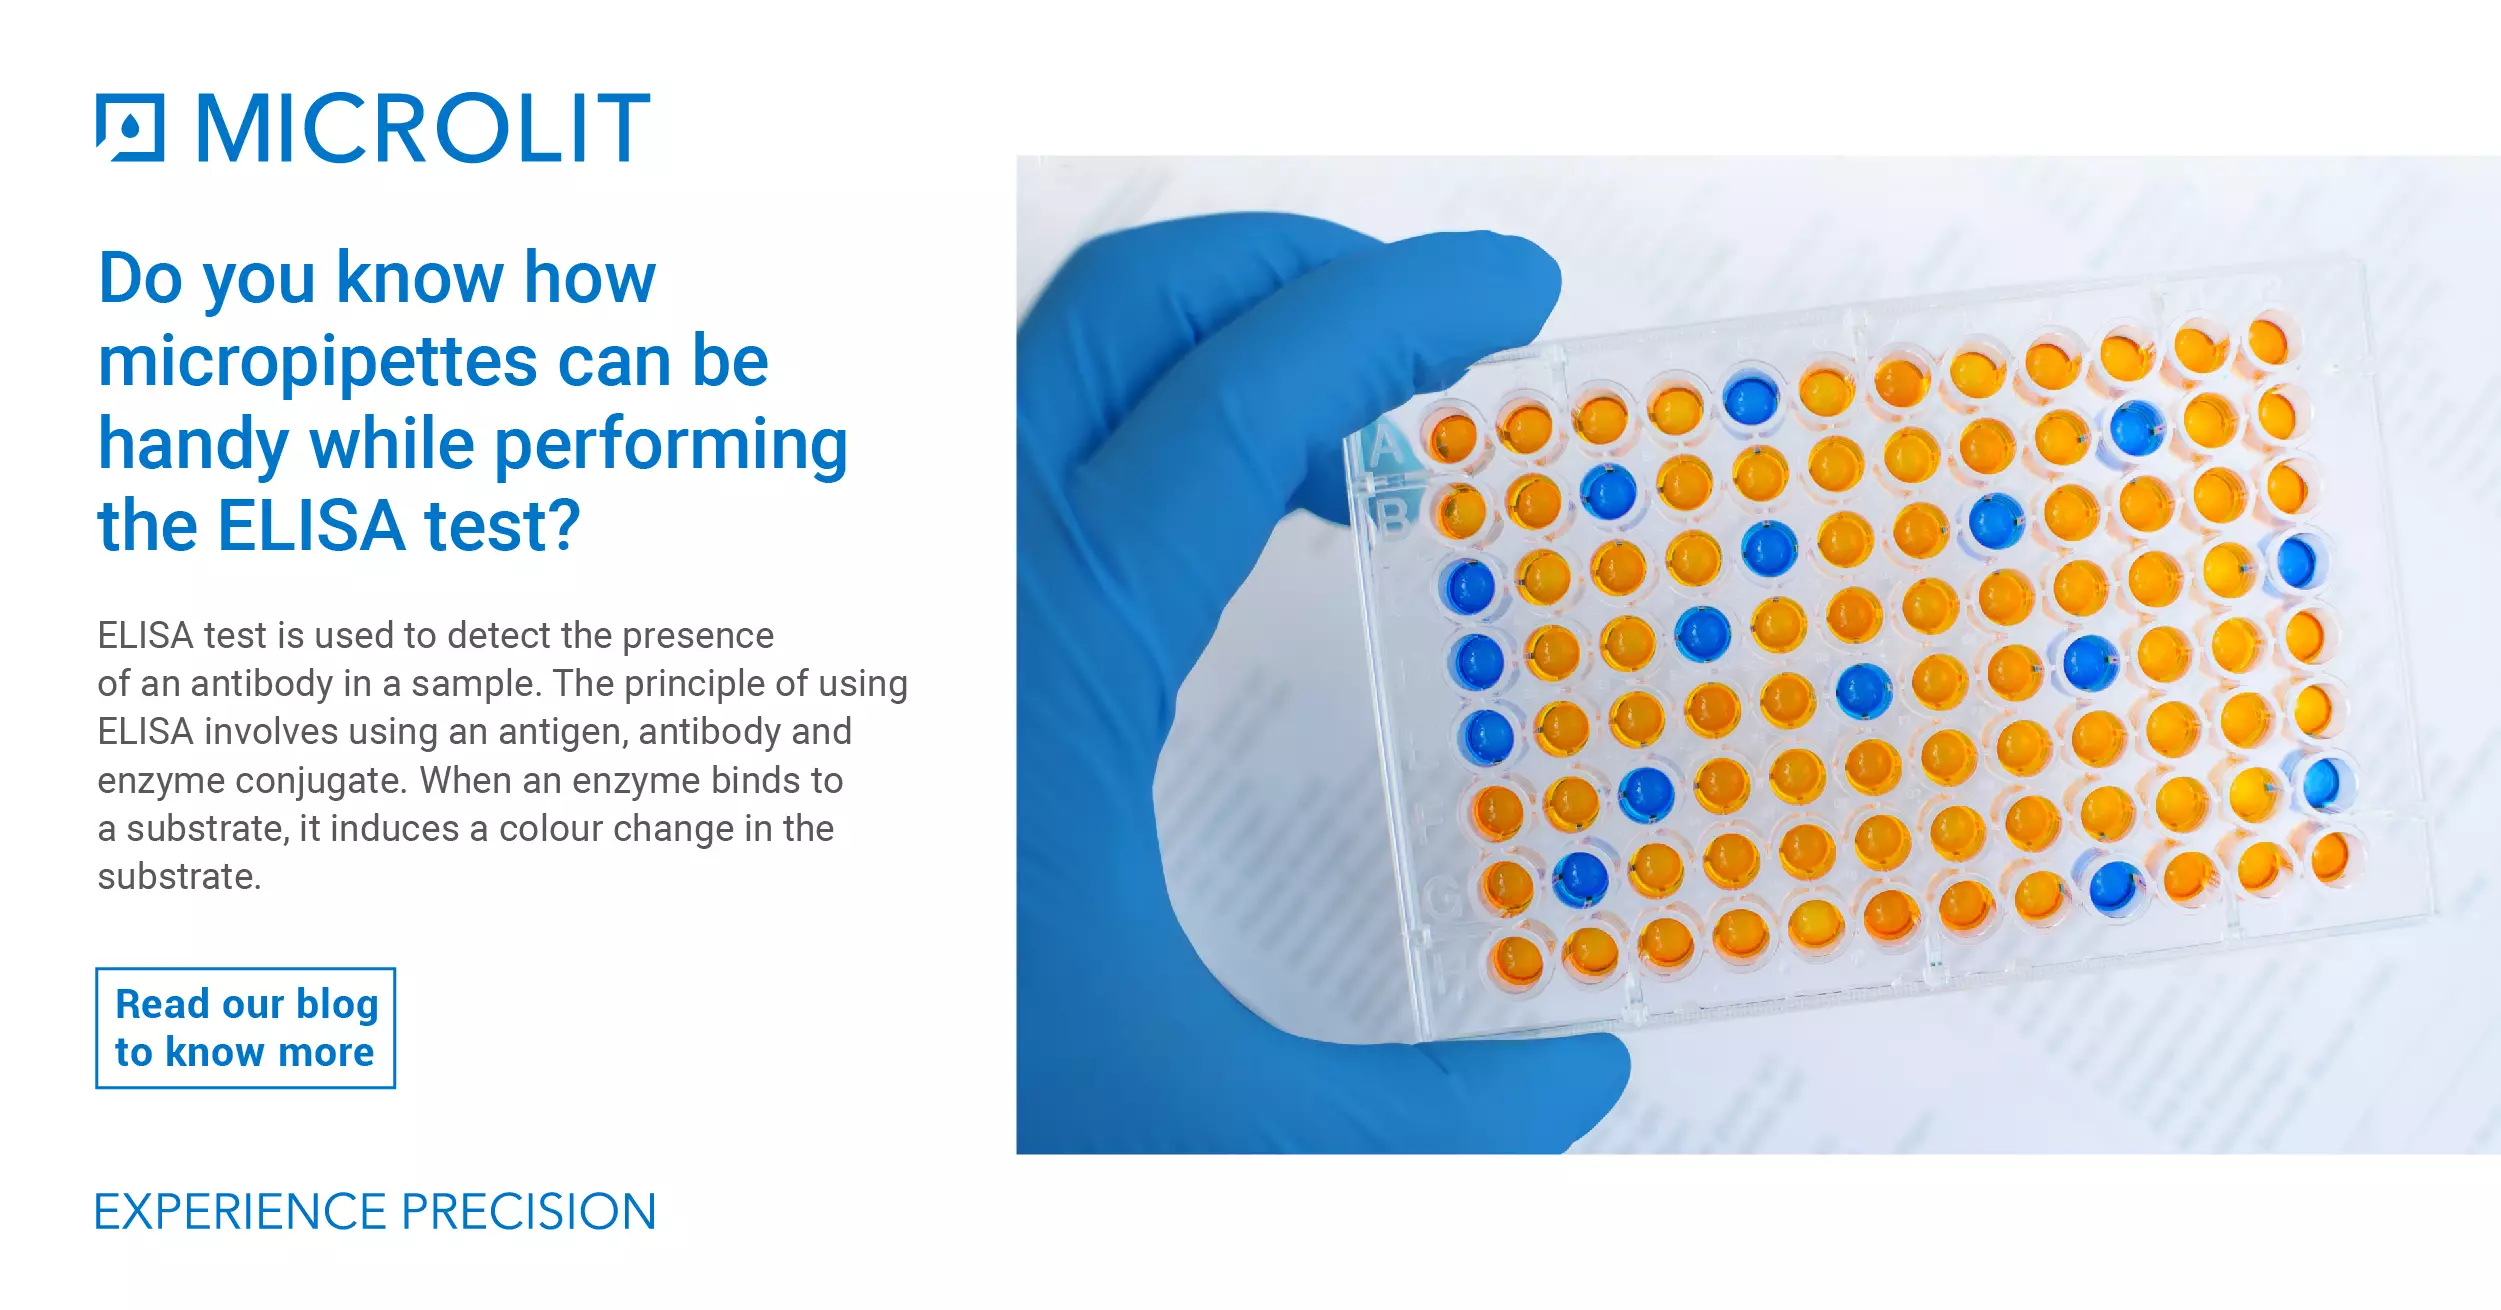 Understanding ELISA Test Basics and How Micropipettes Can be Handy While Performing These Tests